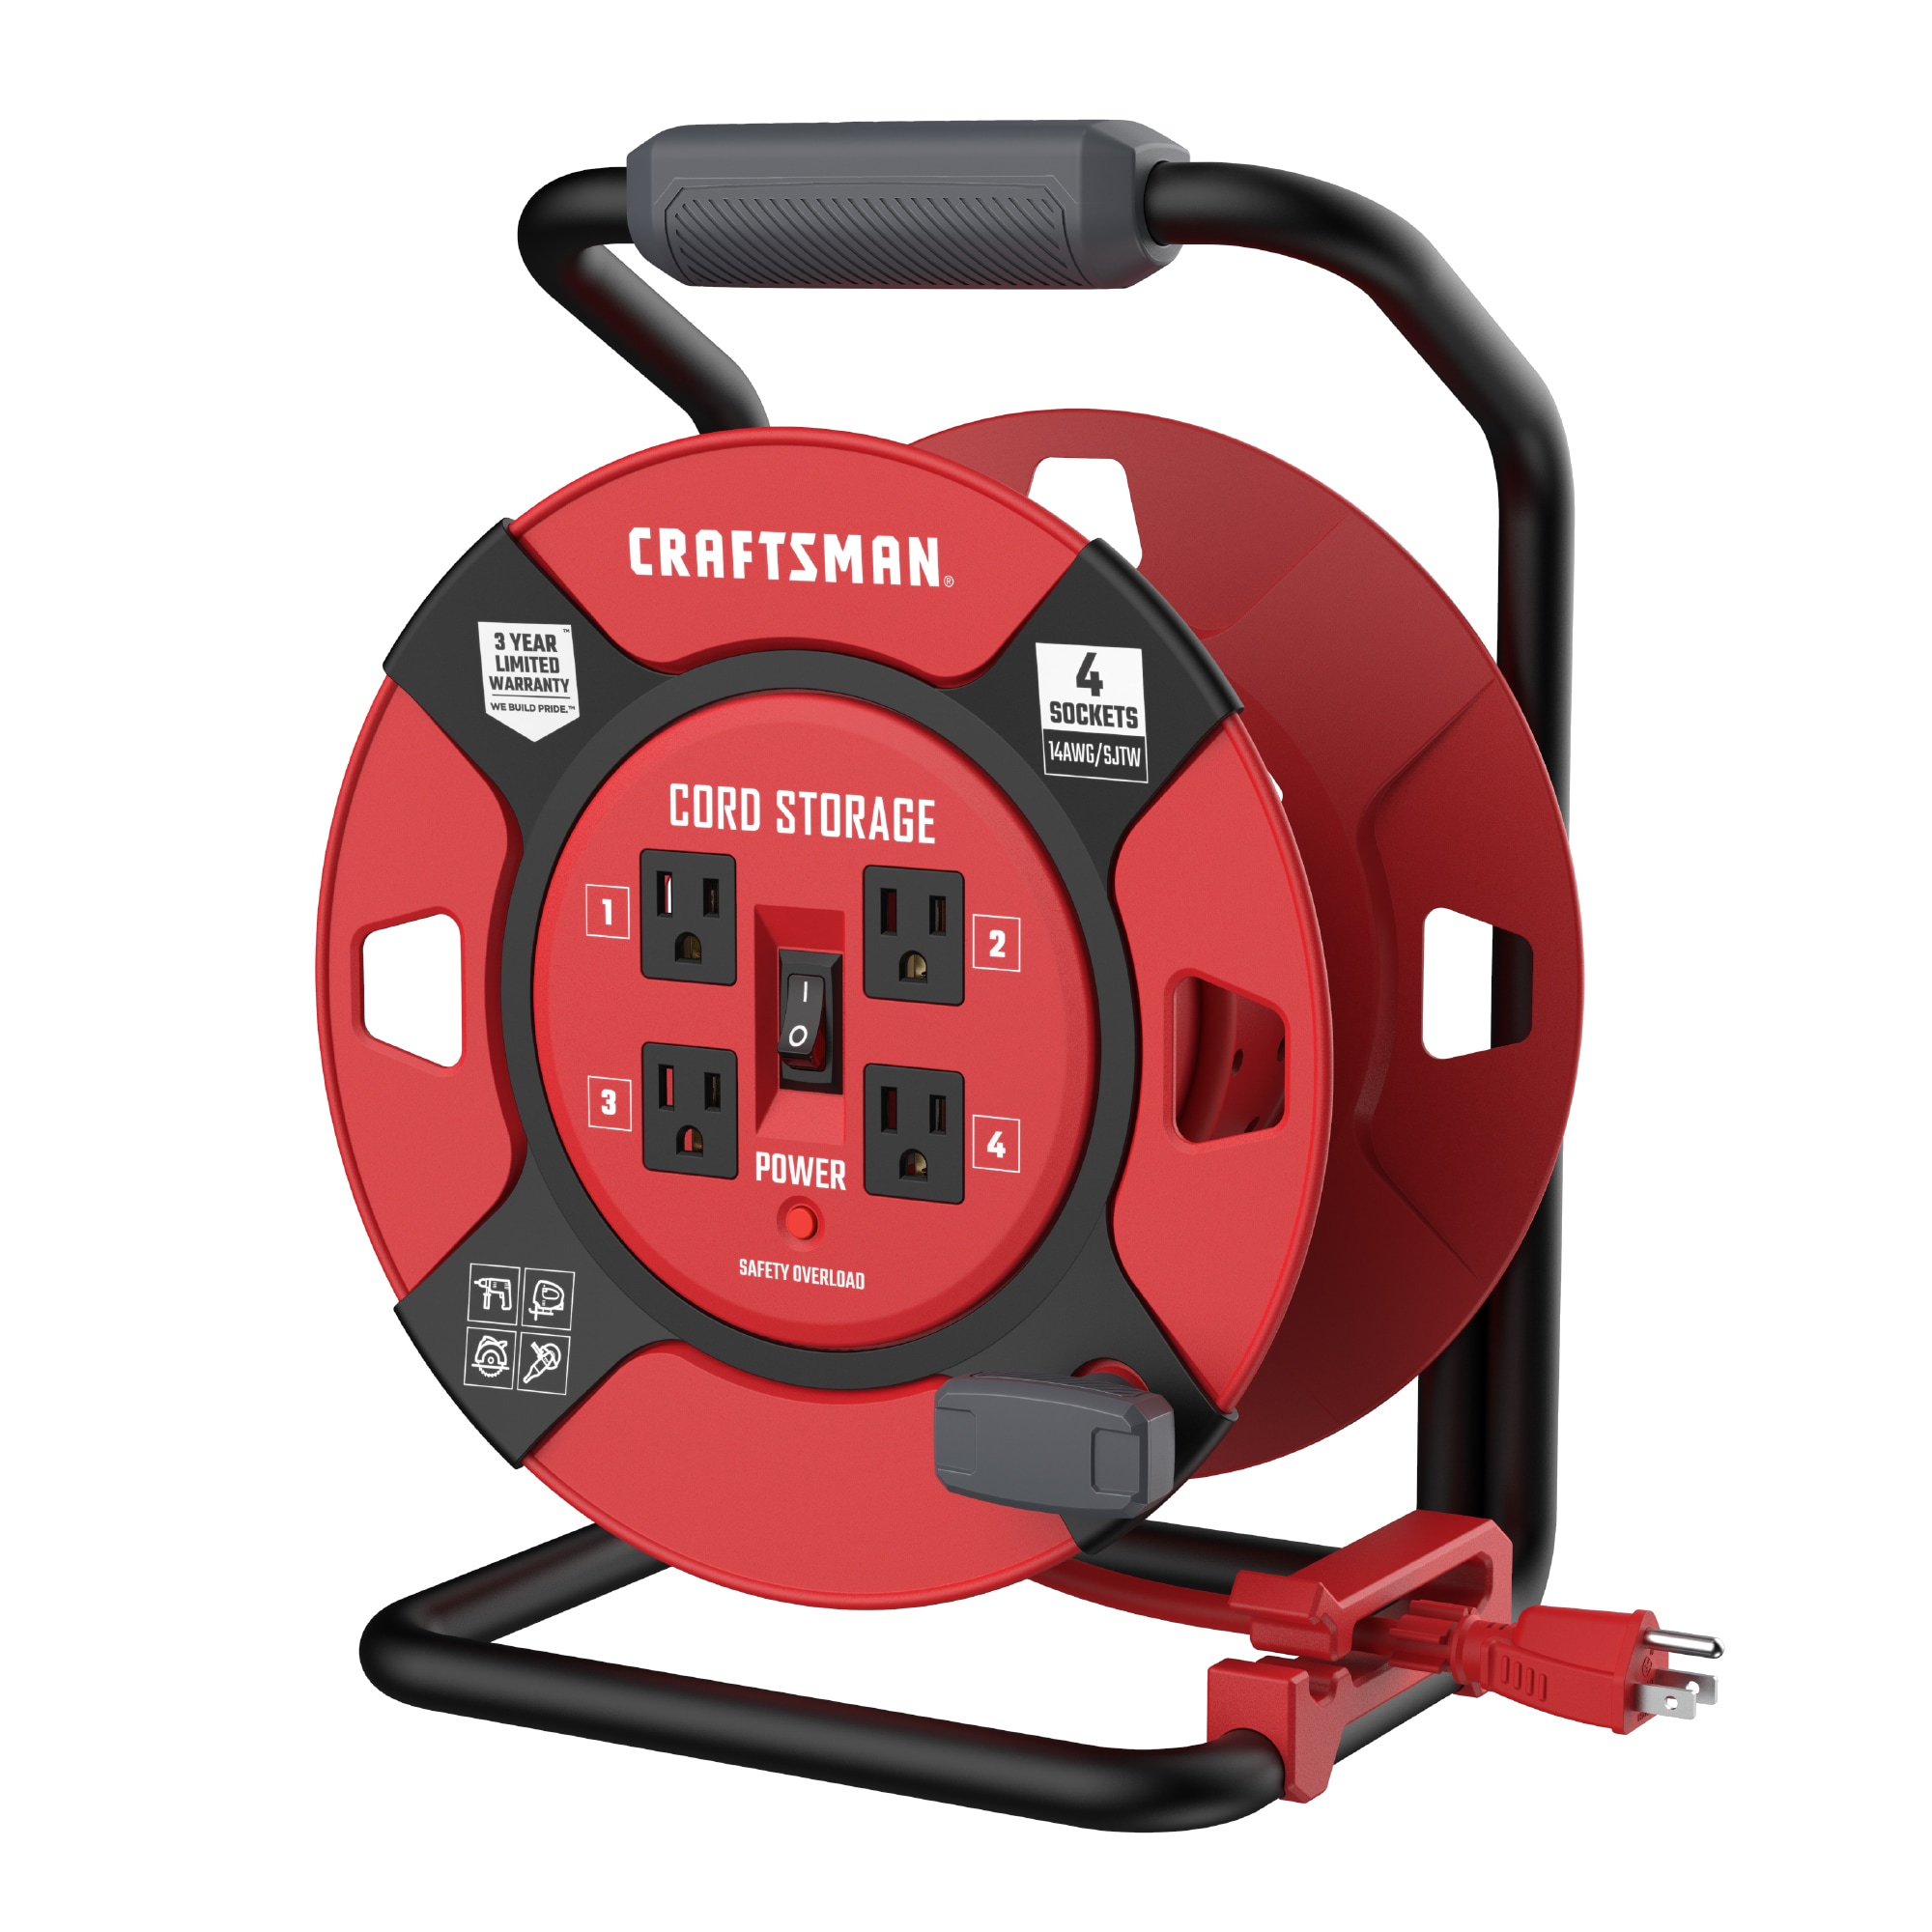 CRAFTSMAN Extension Cord Accessories at